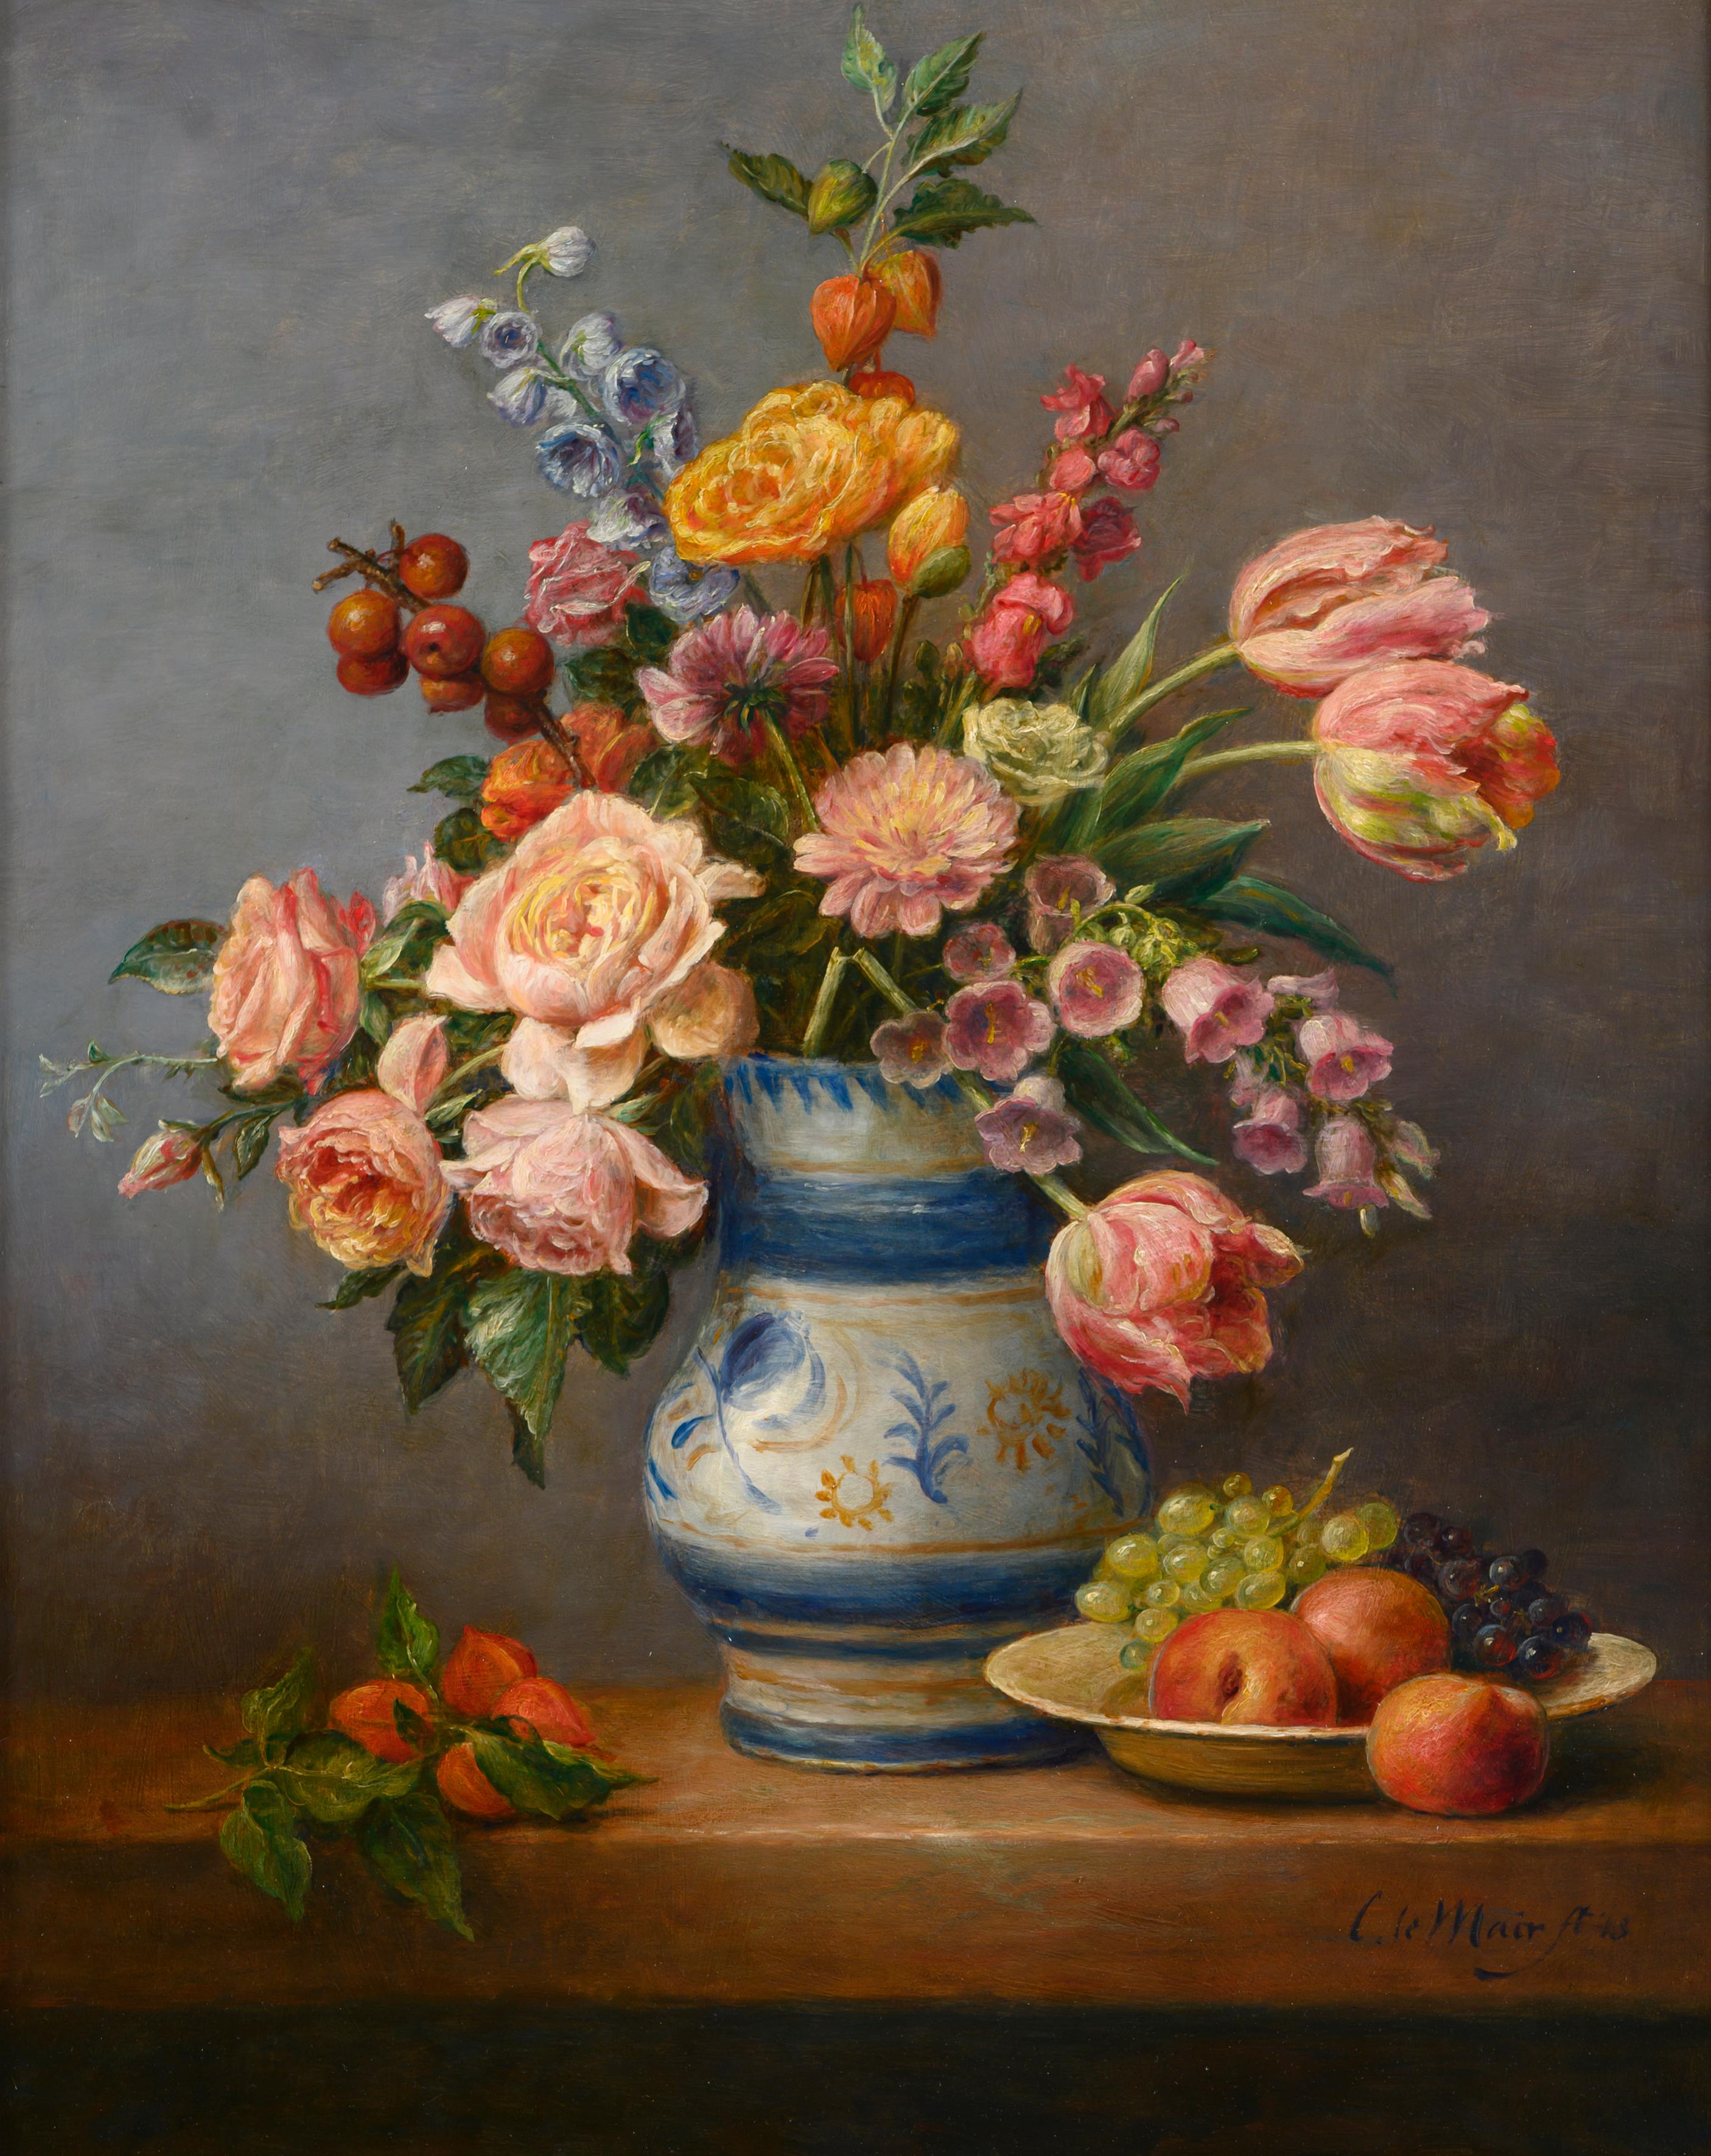 Cornelis Le Mair Still-Life Painting - Flower still life with roses and tulips -21st Century Flower Still-life Painting